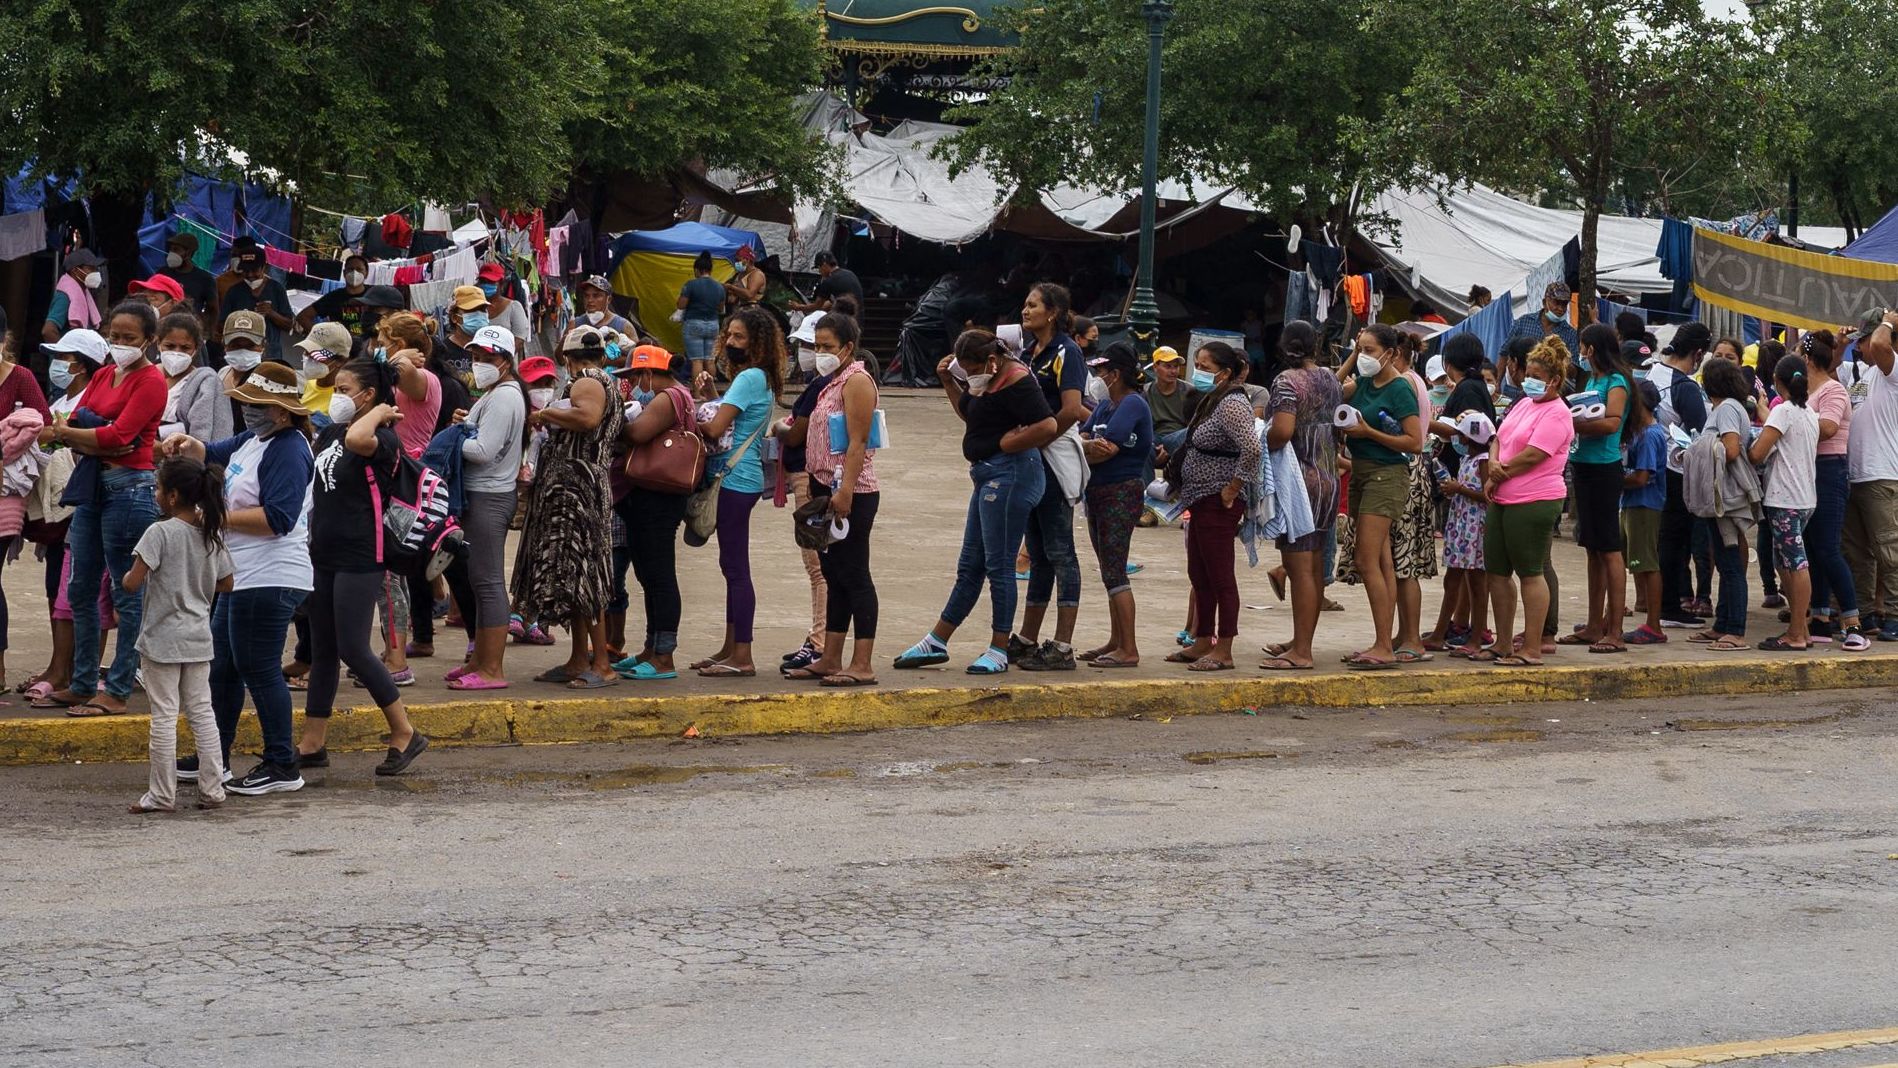 Migrants who were sent back to Mexico under Title 42 wait in line for food and supplies in a camp across the US-Mexico border in Reynosa, Tamaulipas, Mexico on July 10, 2021. 